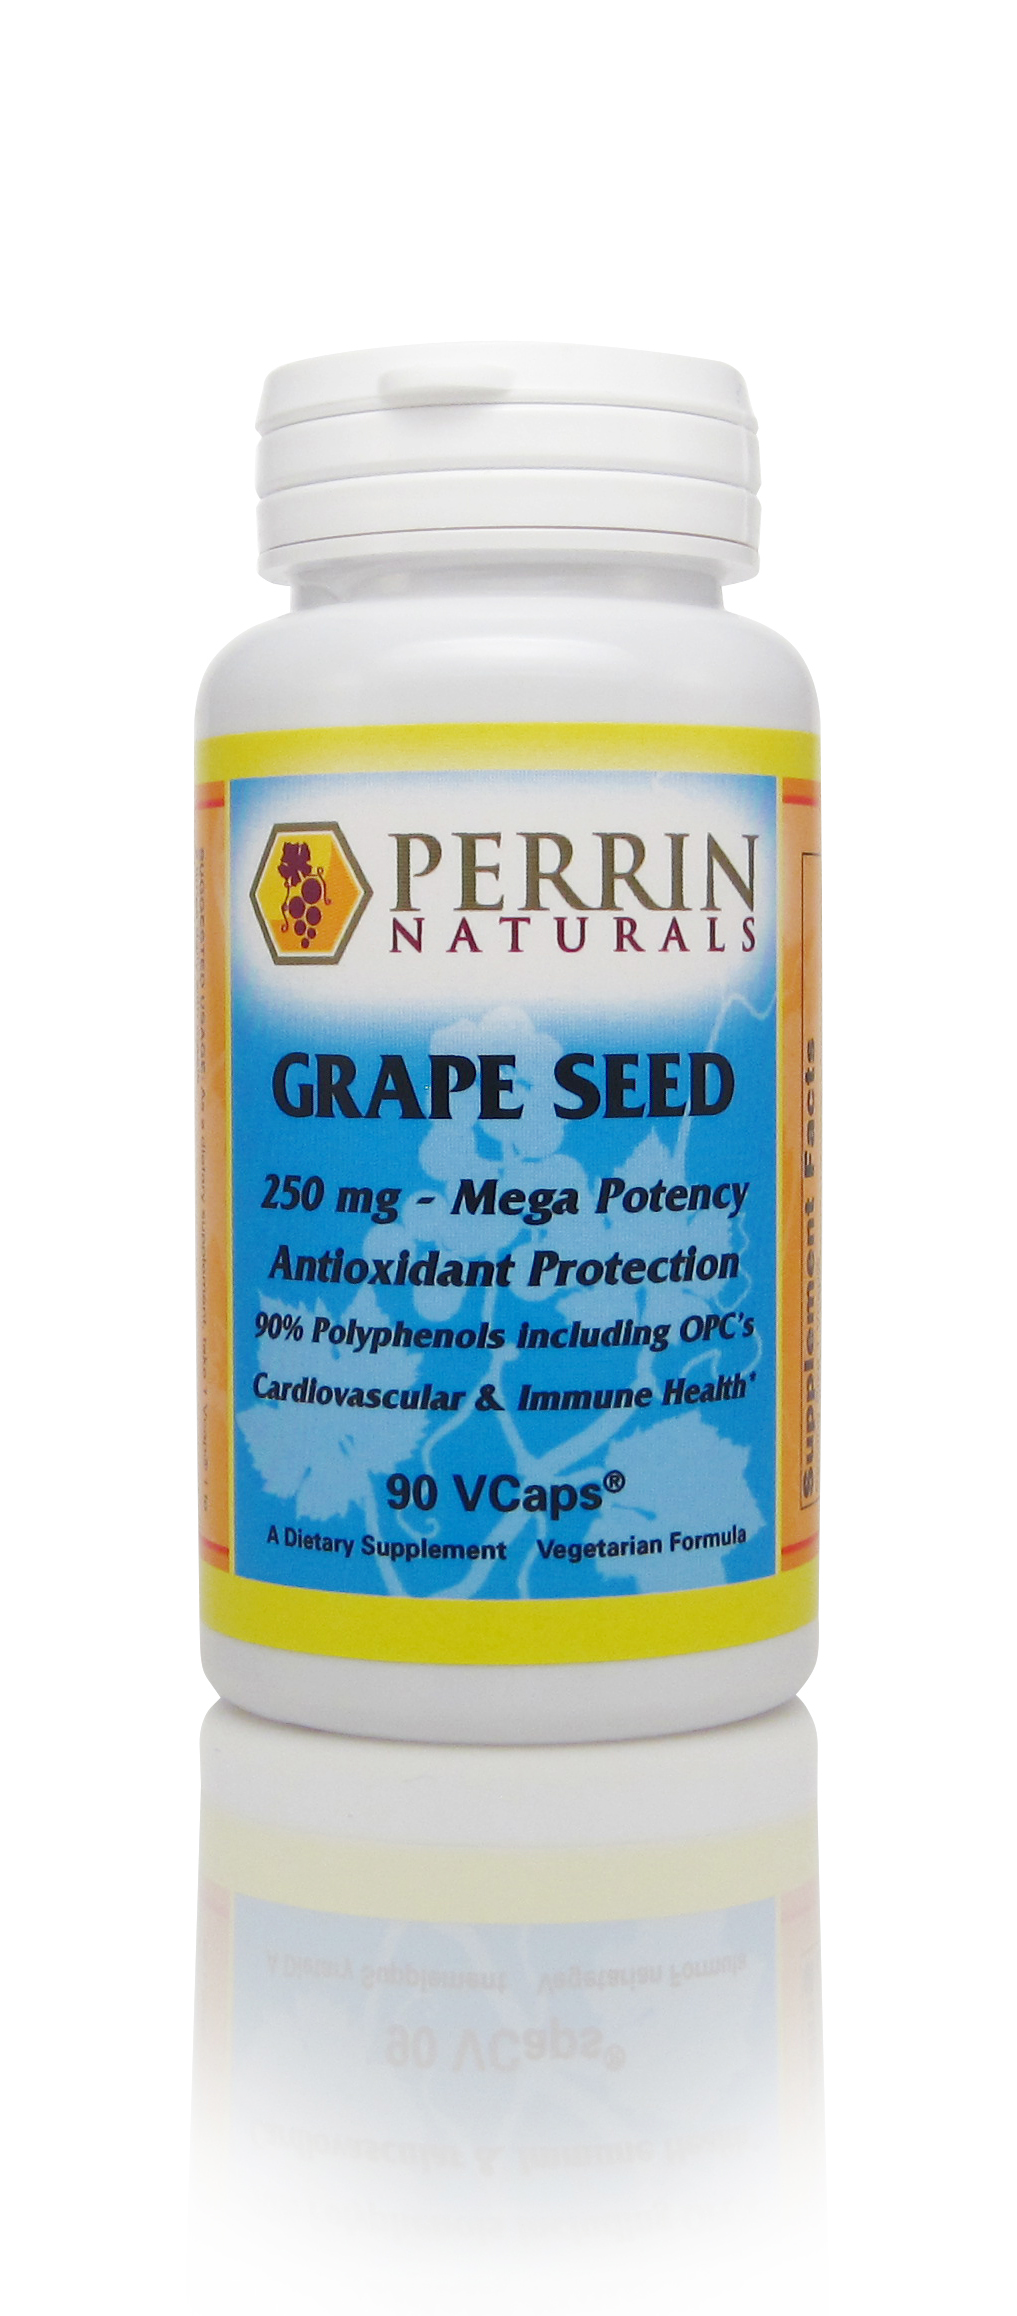 perrin naturals grape seed extract supplement